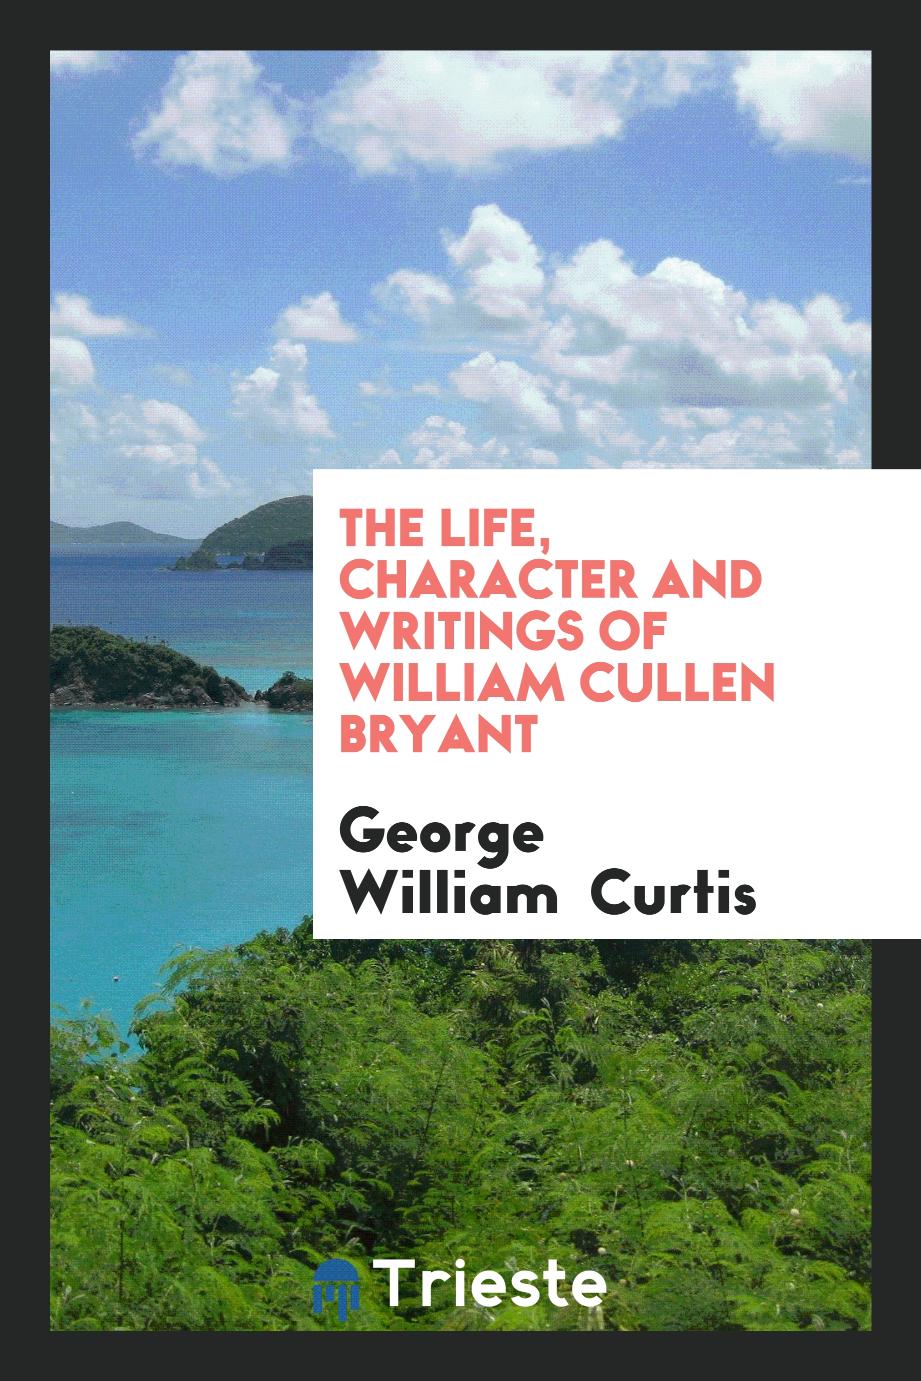 The Life, Character and Writings of William Cullen Bryant